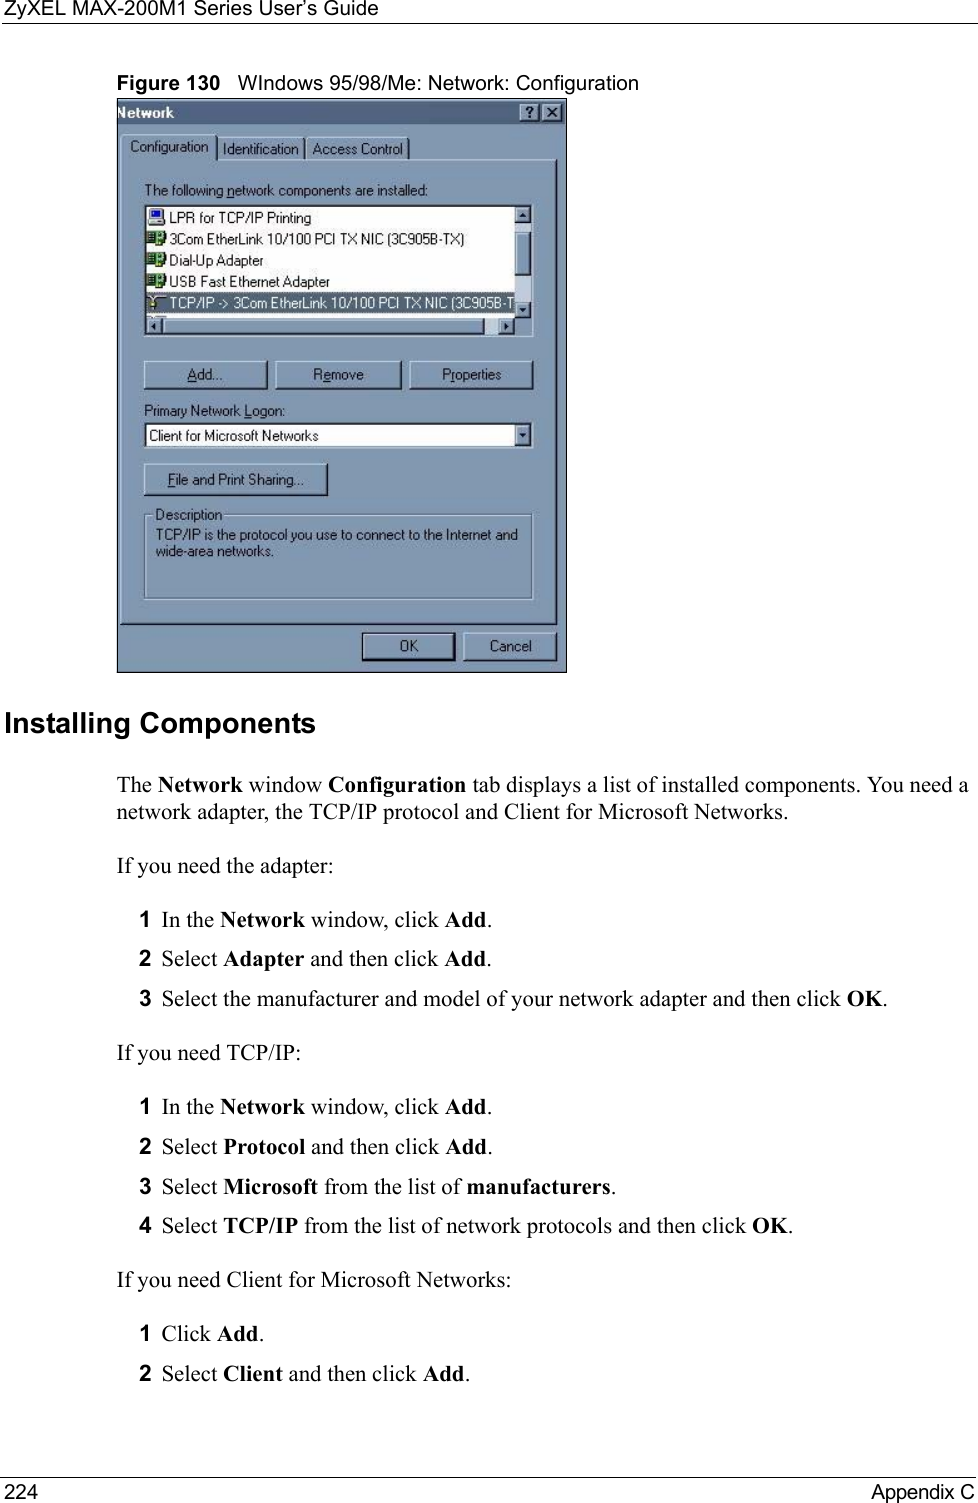 ZyXEL MAX-200M1 Series User’s Guide224 Appendix CFigure 130   WIndows 95/98/Me: Network: ConfigurationInstalling ComponentsThe Network window Configuration tab displays a list of installed components. You need a network adapter, the TCP/IP protocol and Client for Microsoft Networks.If you need the adapter:1In the Network window, click Add.2Select Adapter and then click Add.3Select the manufacturer and model of your network adapter and then click OK.If you need TCP/IP:1In the Network window, click Add.2Select Protocol and then click Add.3Select Microsoft from the list of manufacturers.4Select TCP/IP from the list of network protocols and then click OK.If you need Client for Microsoft Networks:1Click Add.2Select Client and then click Add.